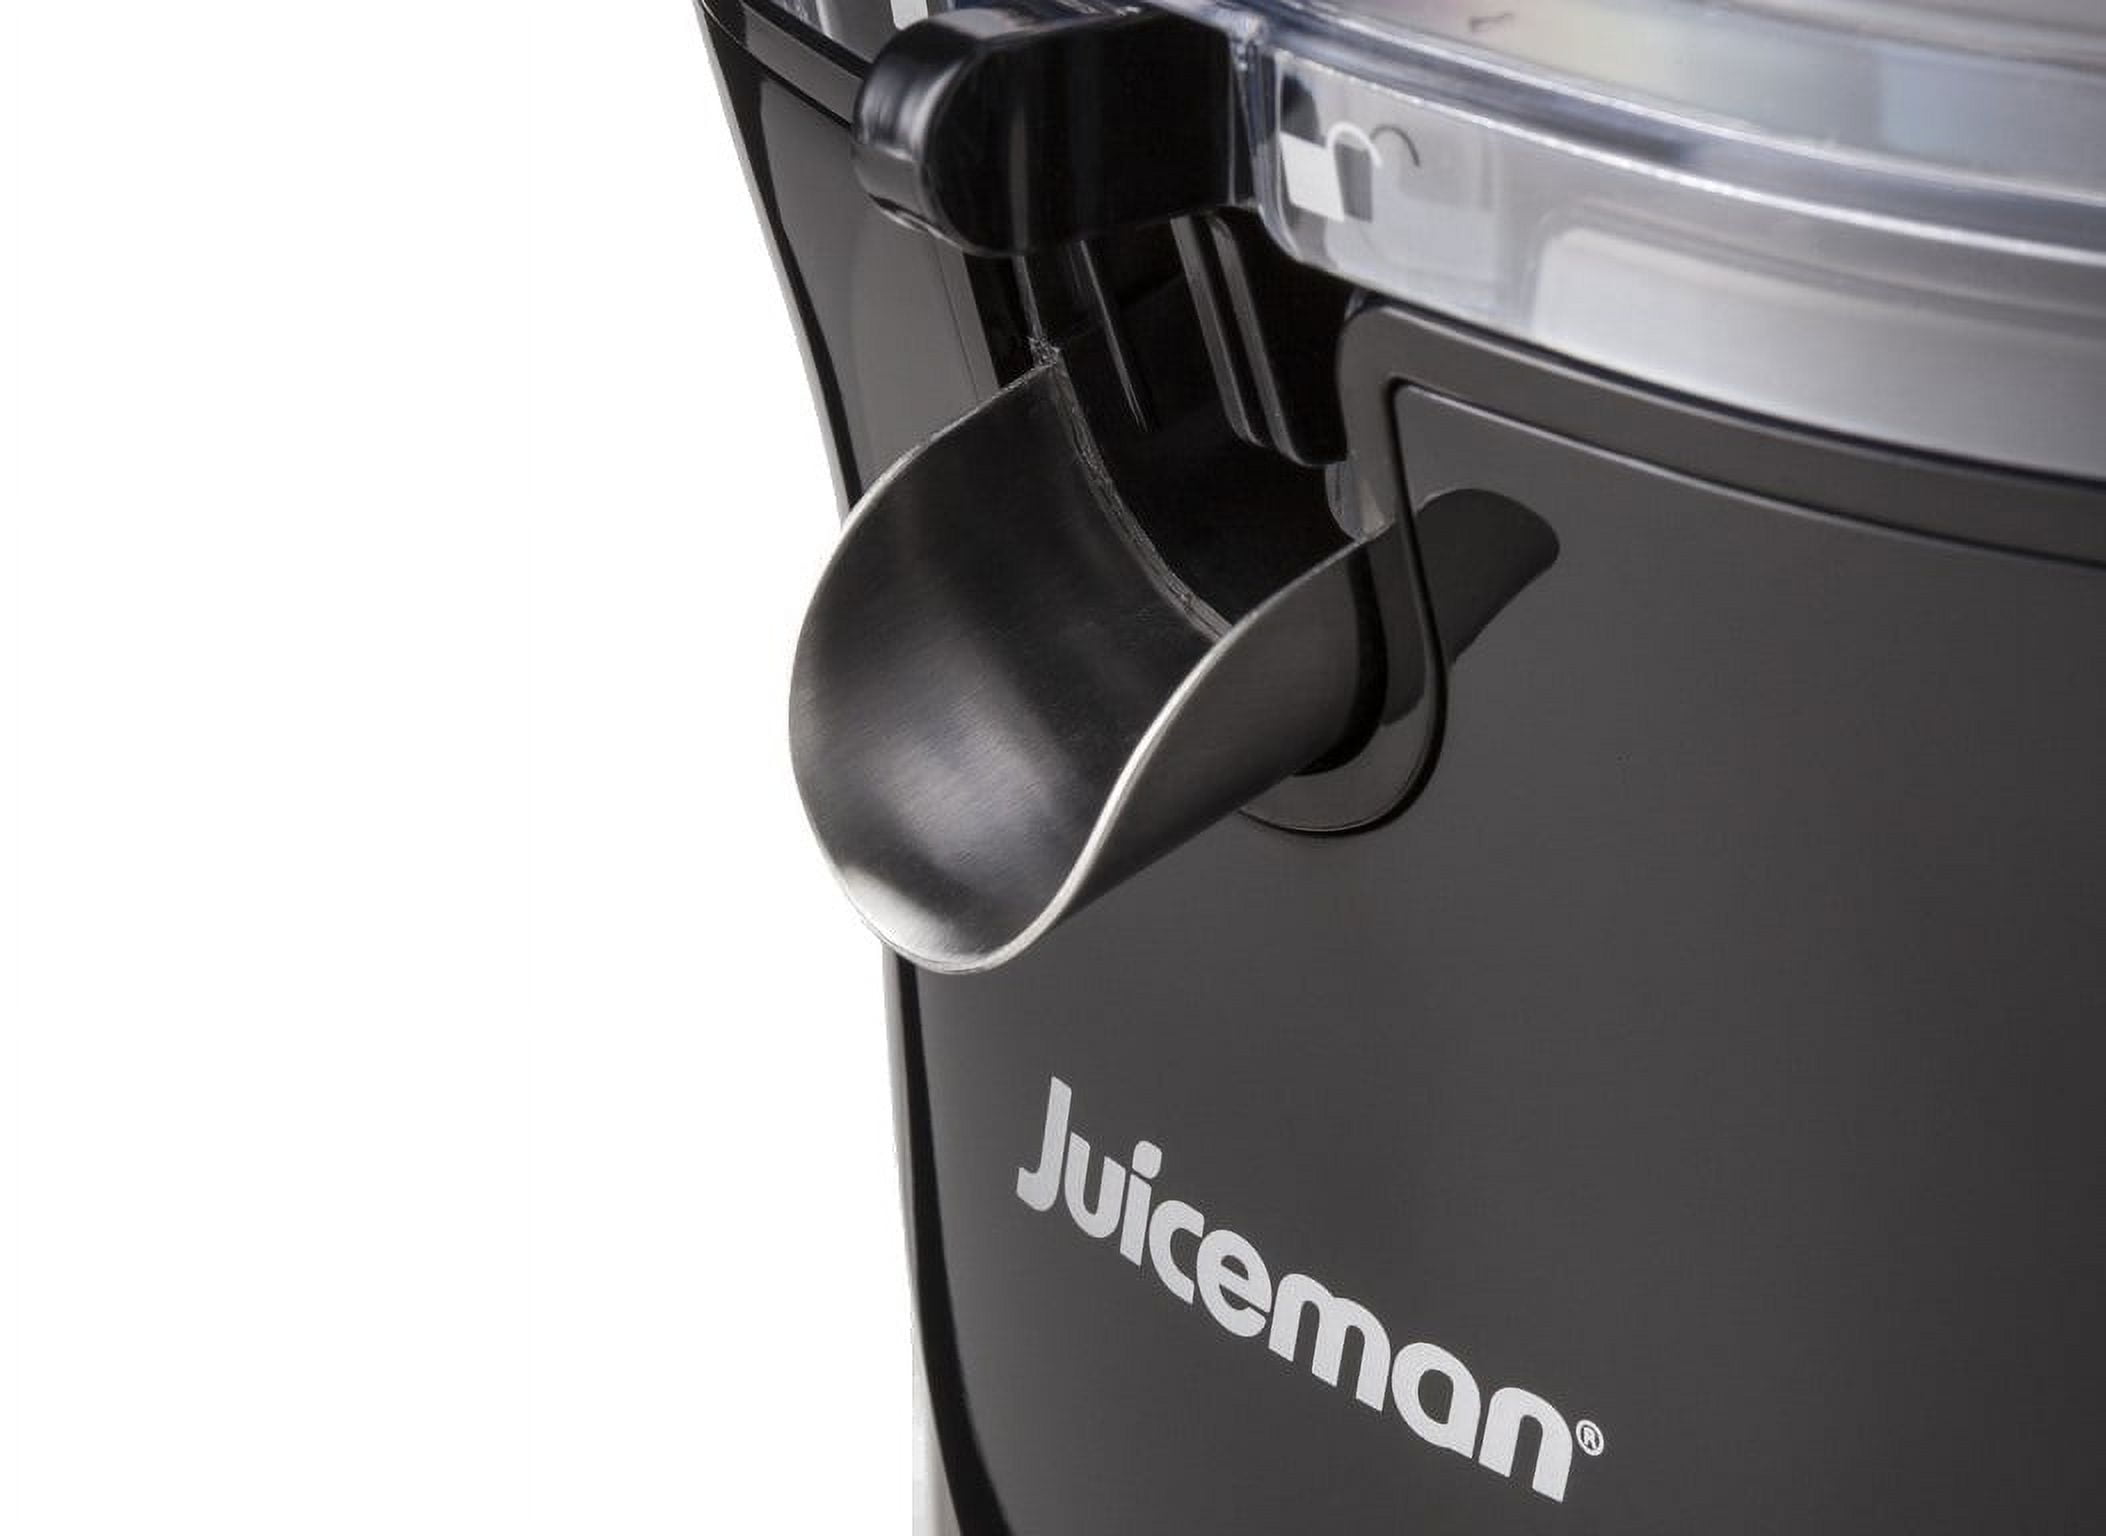 Juiceman JM550S The Big Apple 4-Inch Wide-Mouth Automatic Juice Extractor  juicer